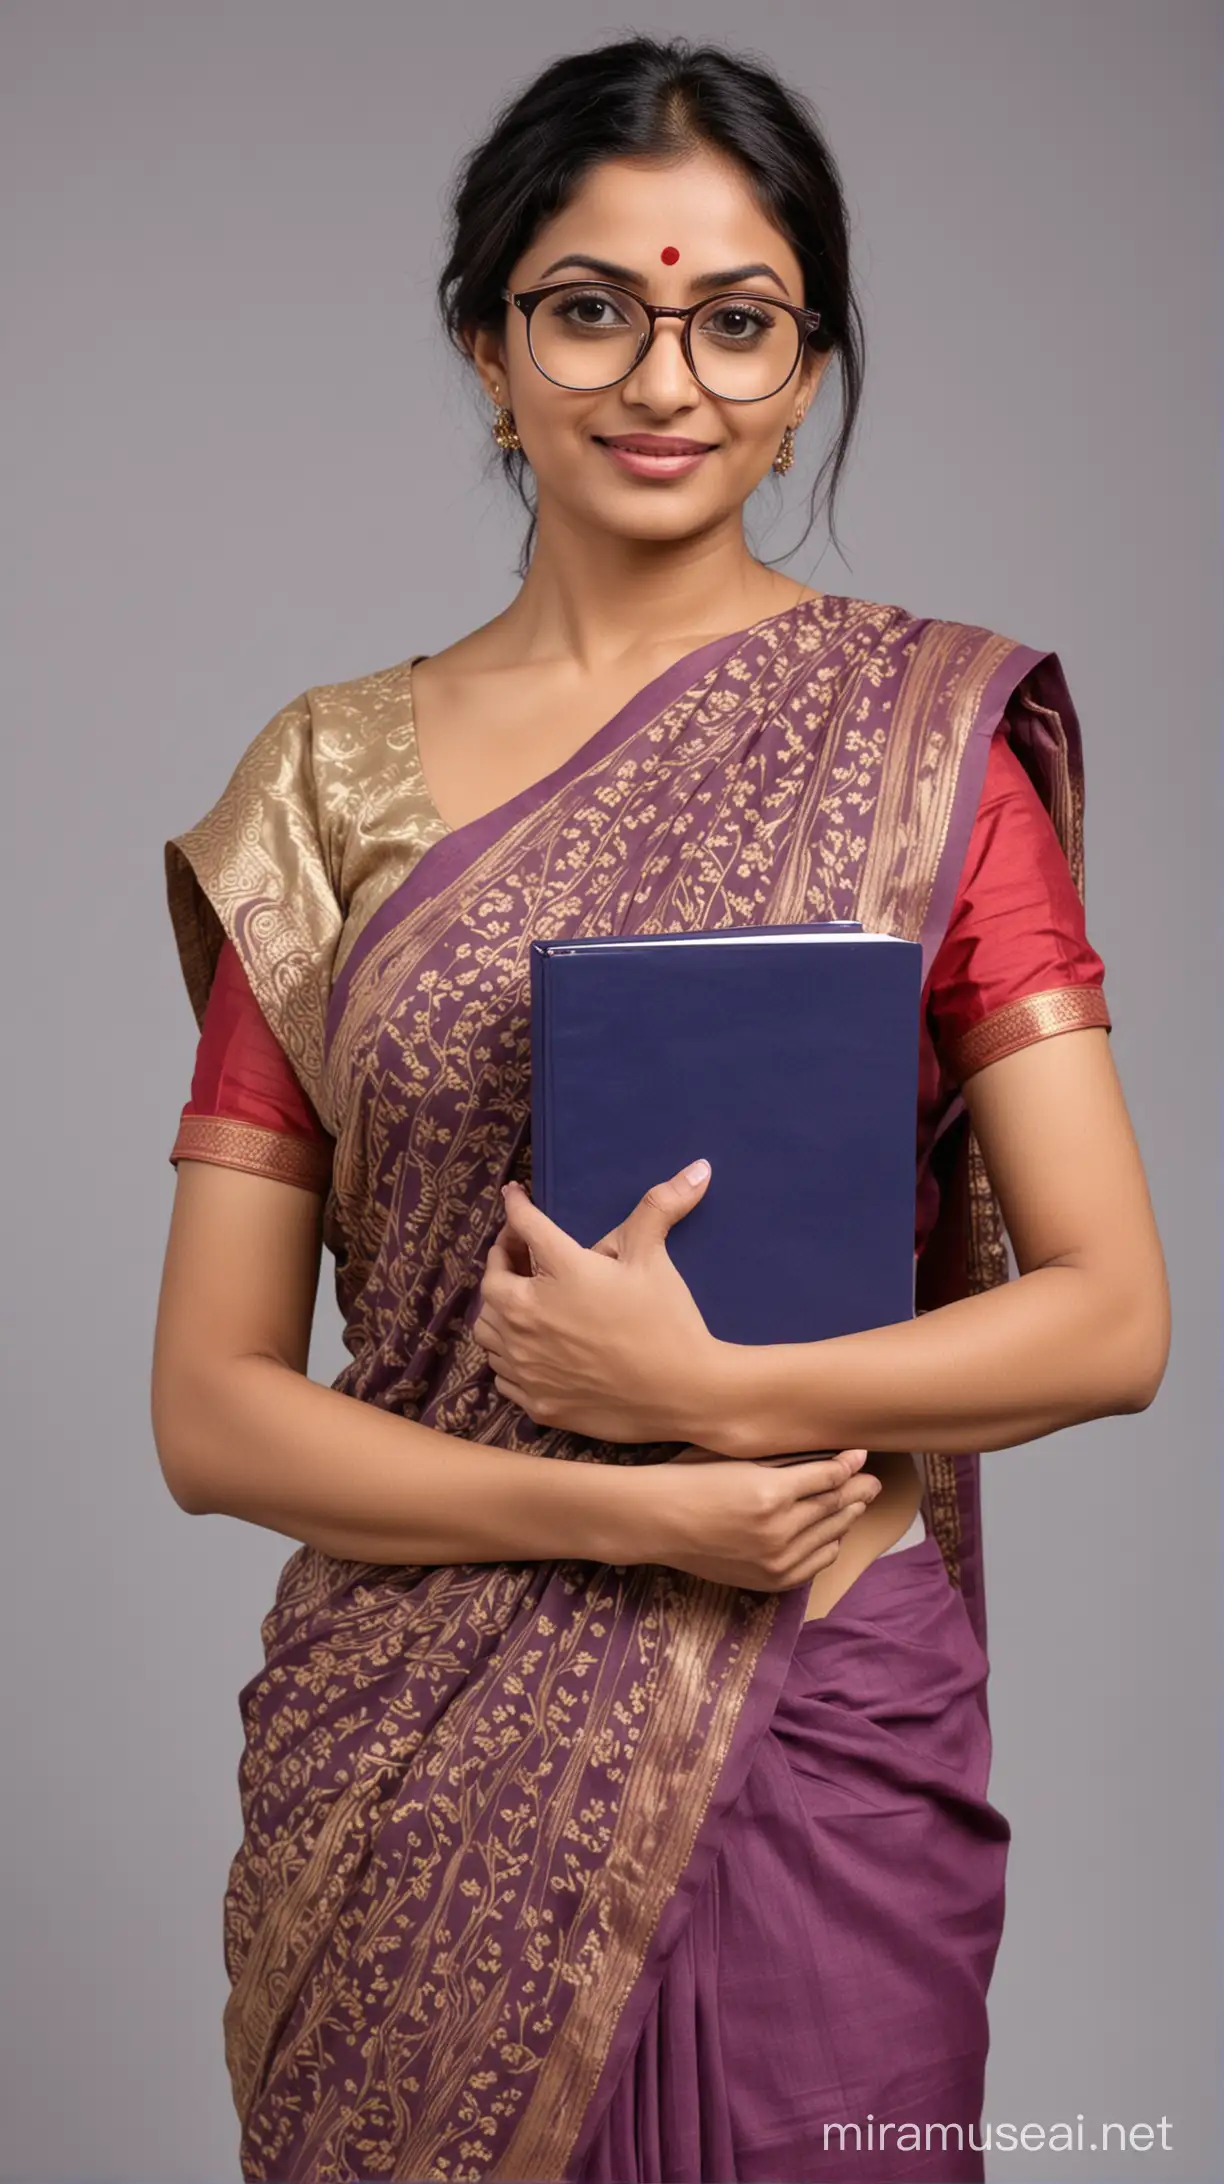 Indian Educator in Traditional Saree and Eyeglasses with Educational Materials